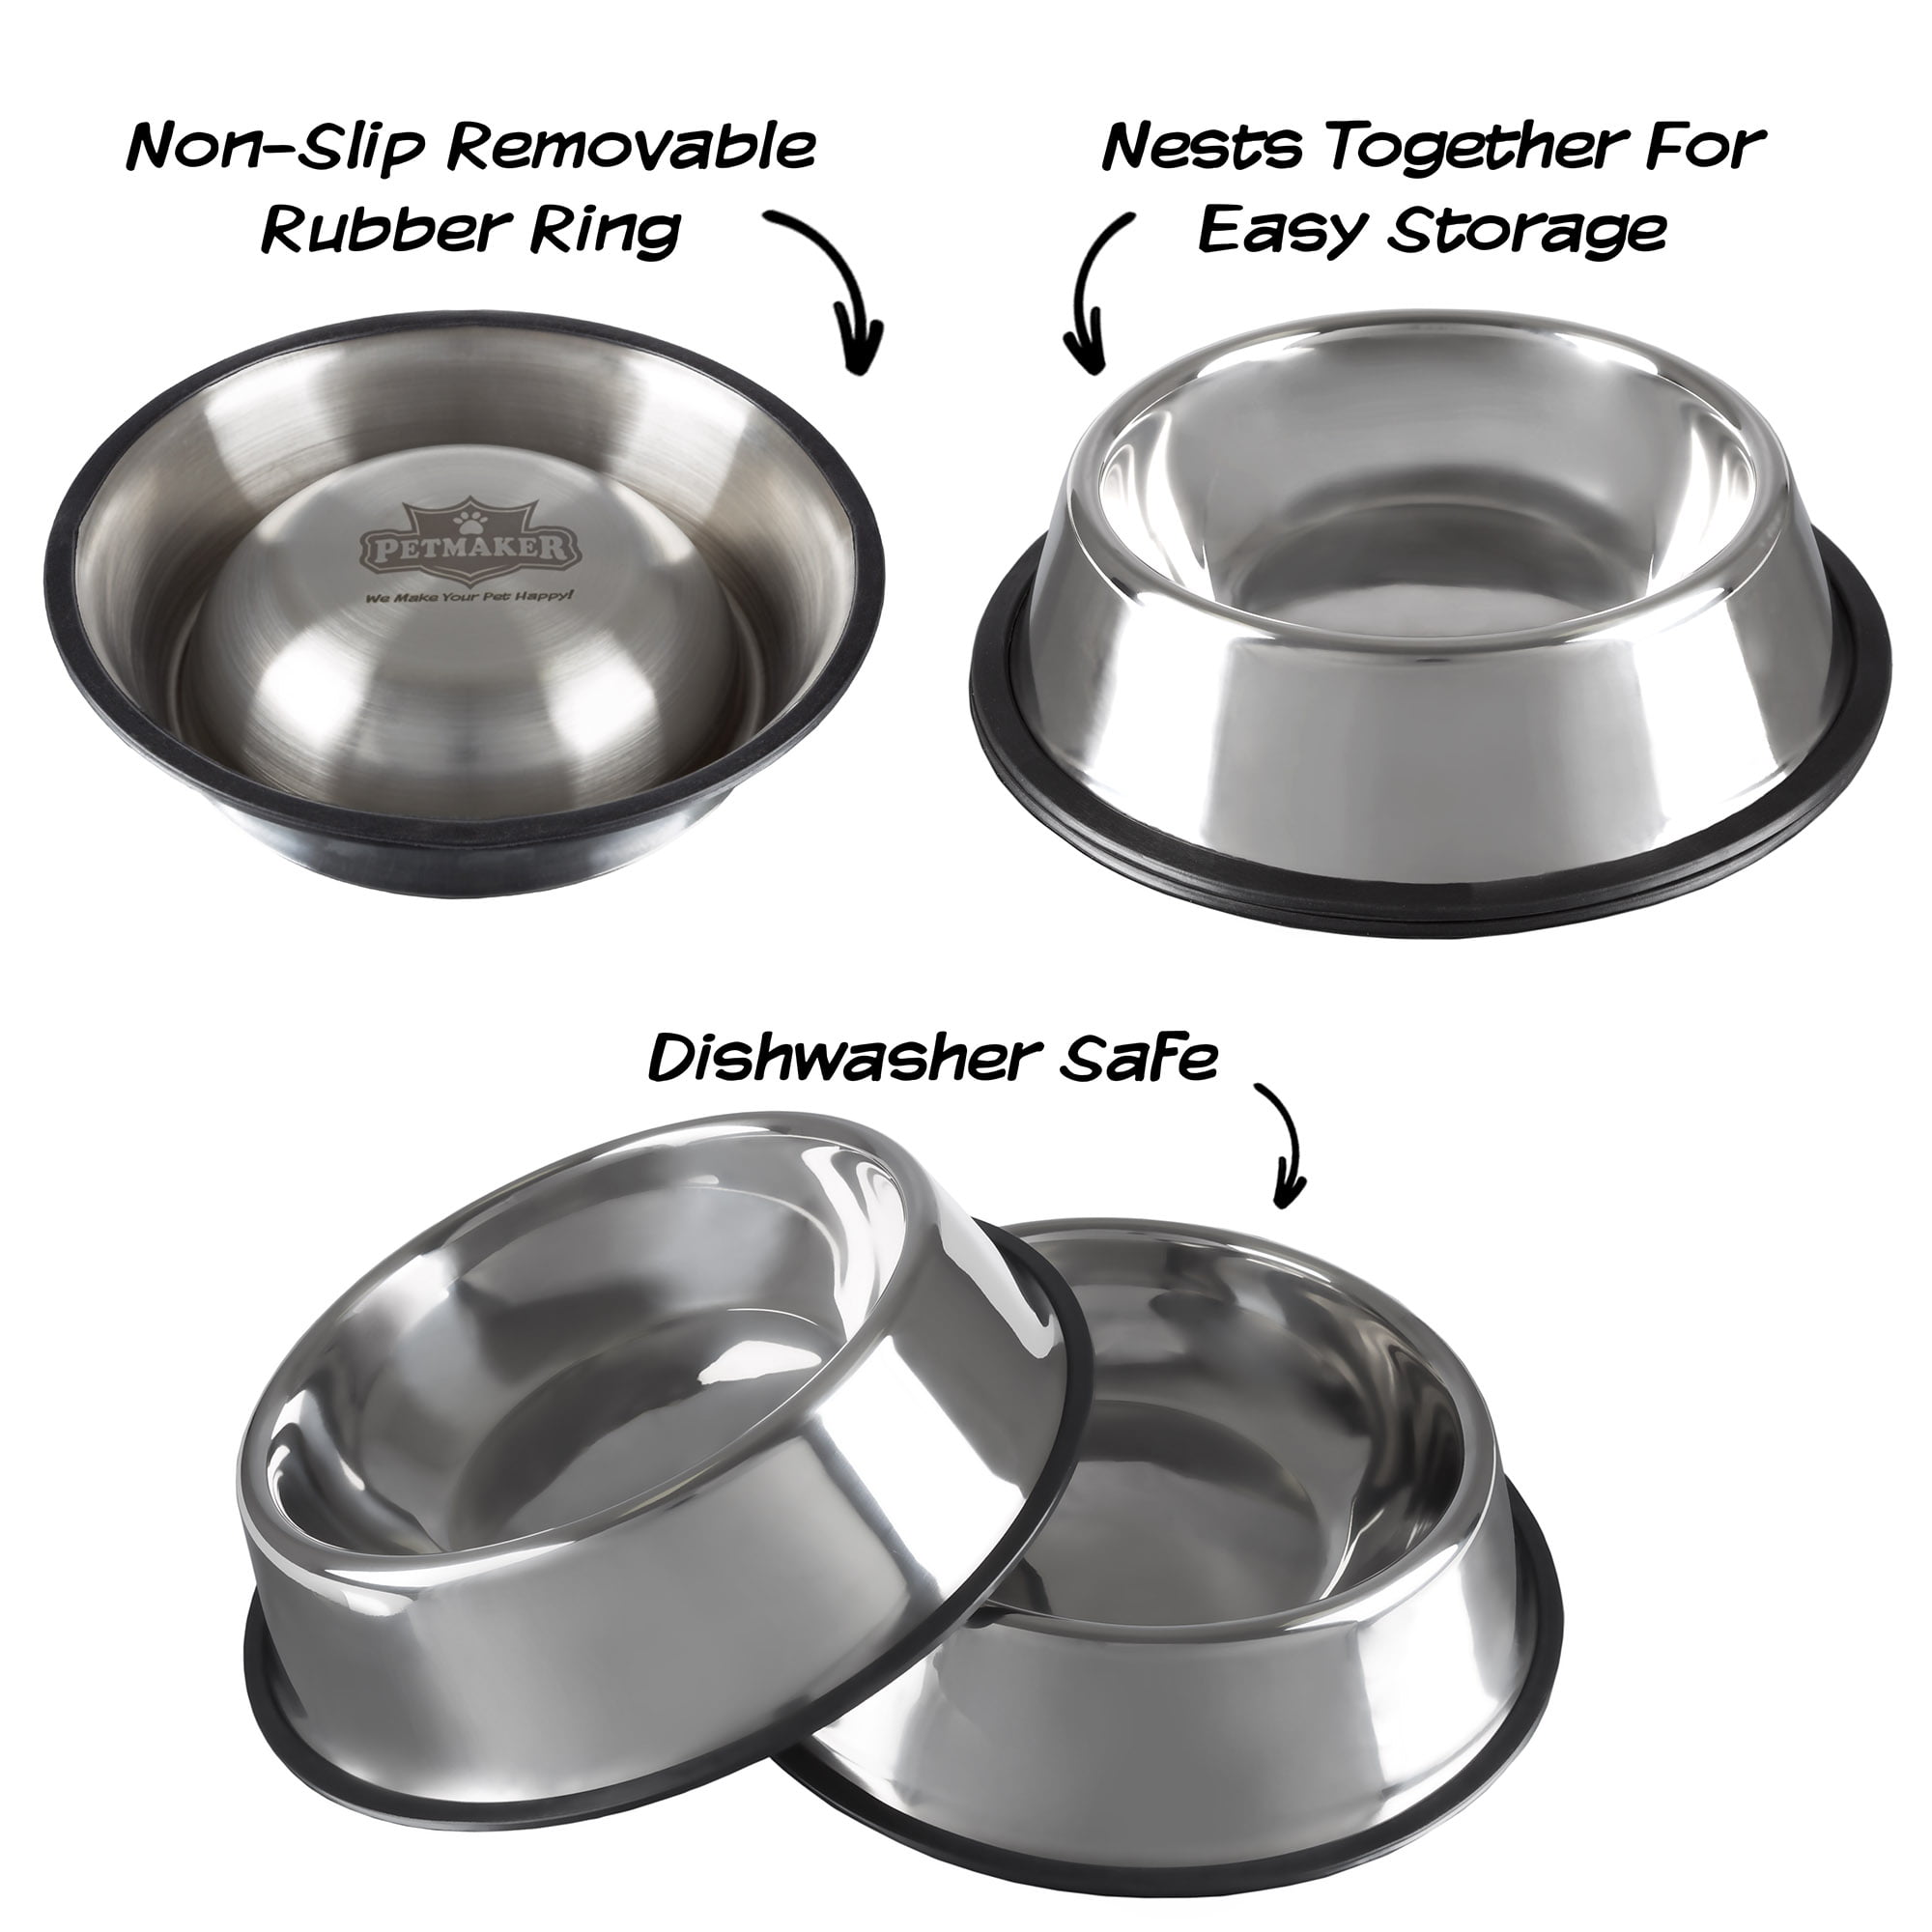 Elevated Pet Bowls with Non Slip Stand for Dogs and Cats-Removeable and Collapsible Silicone Feeder for Food and Water- 16 oz Each by Petmaker (Blue)